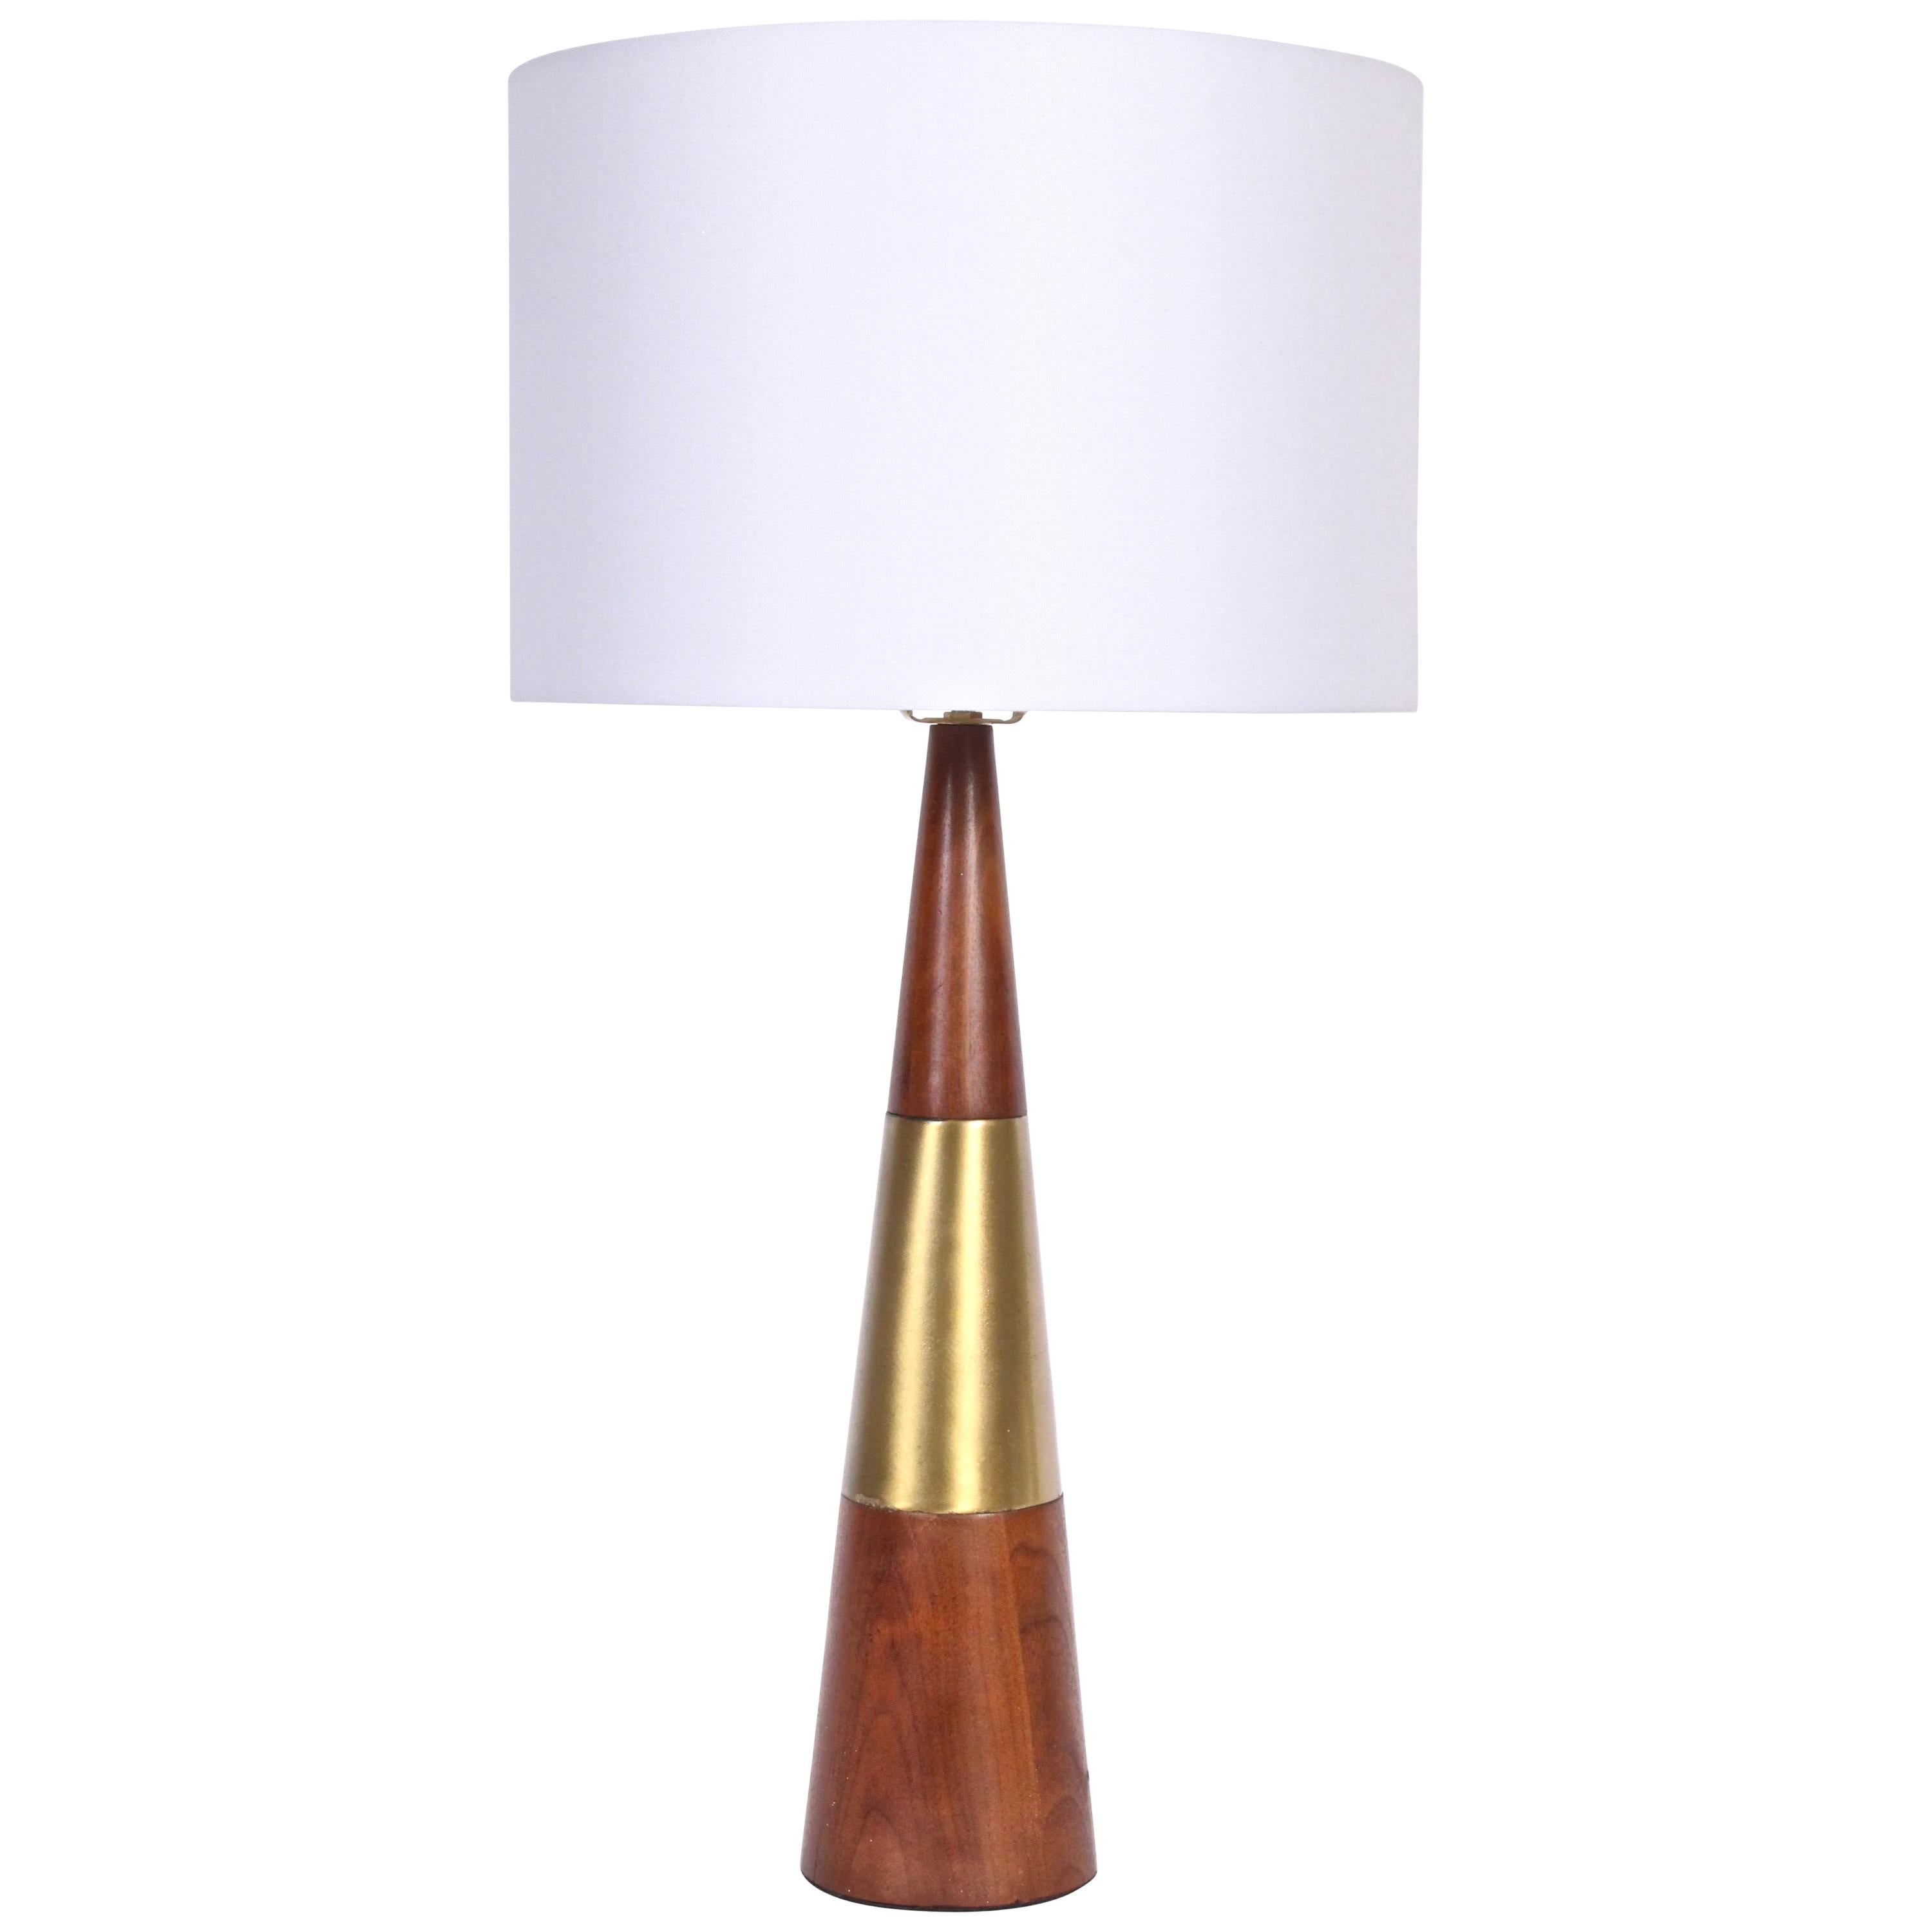 Tall Tony Paul for Westwood Swedish Brass & Solid Walnut Table Lamp, 1950s For Sale